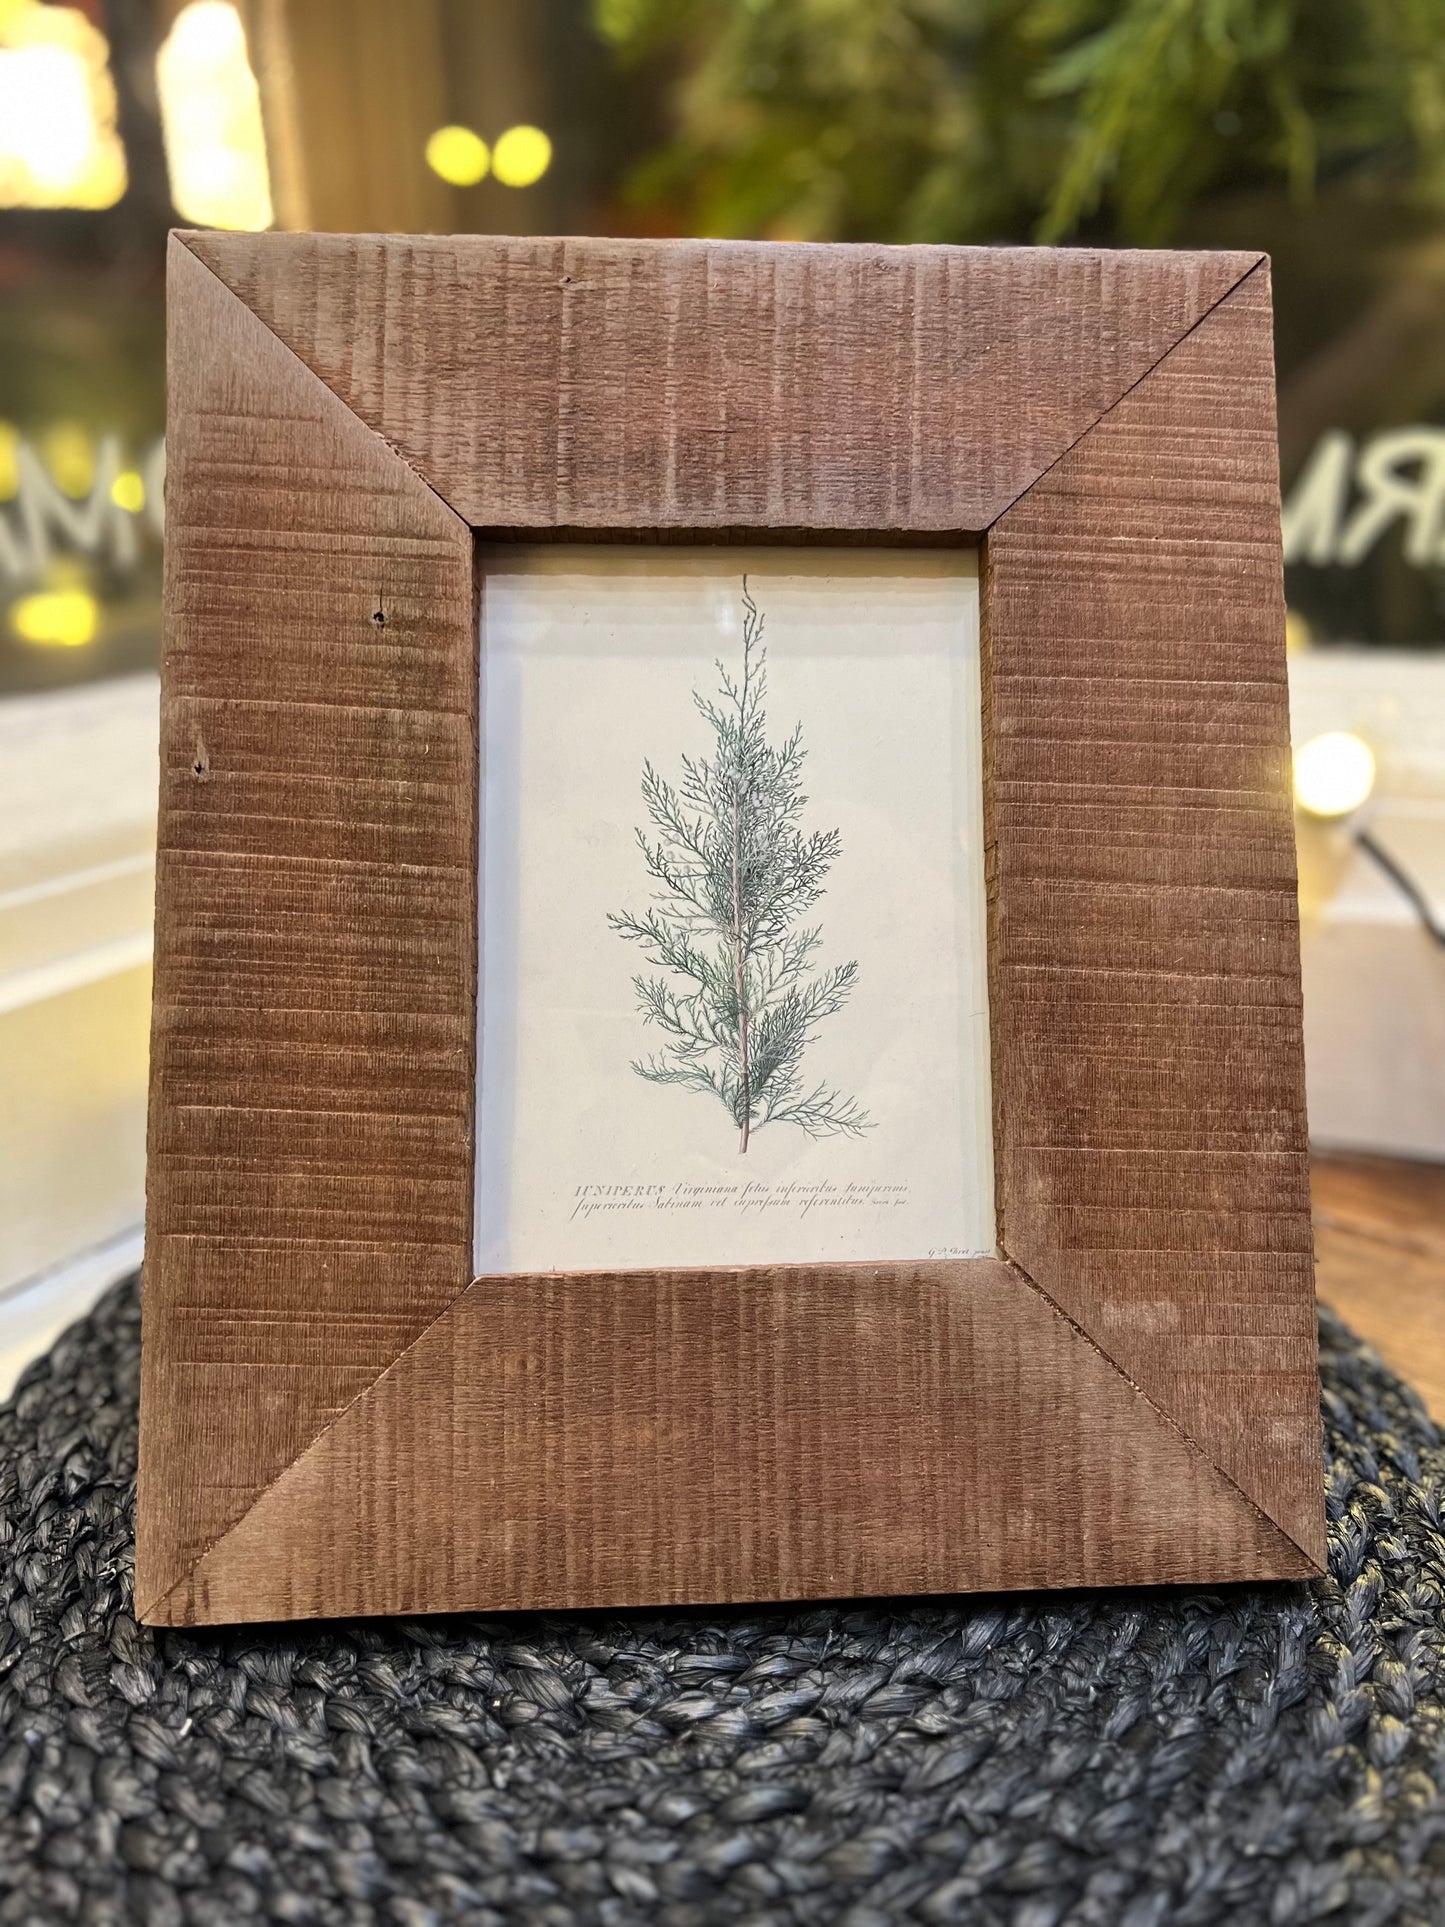 Reclaimed Wood Picture Frames